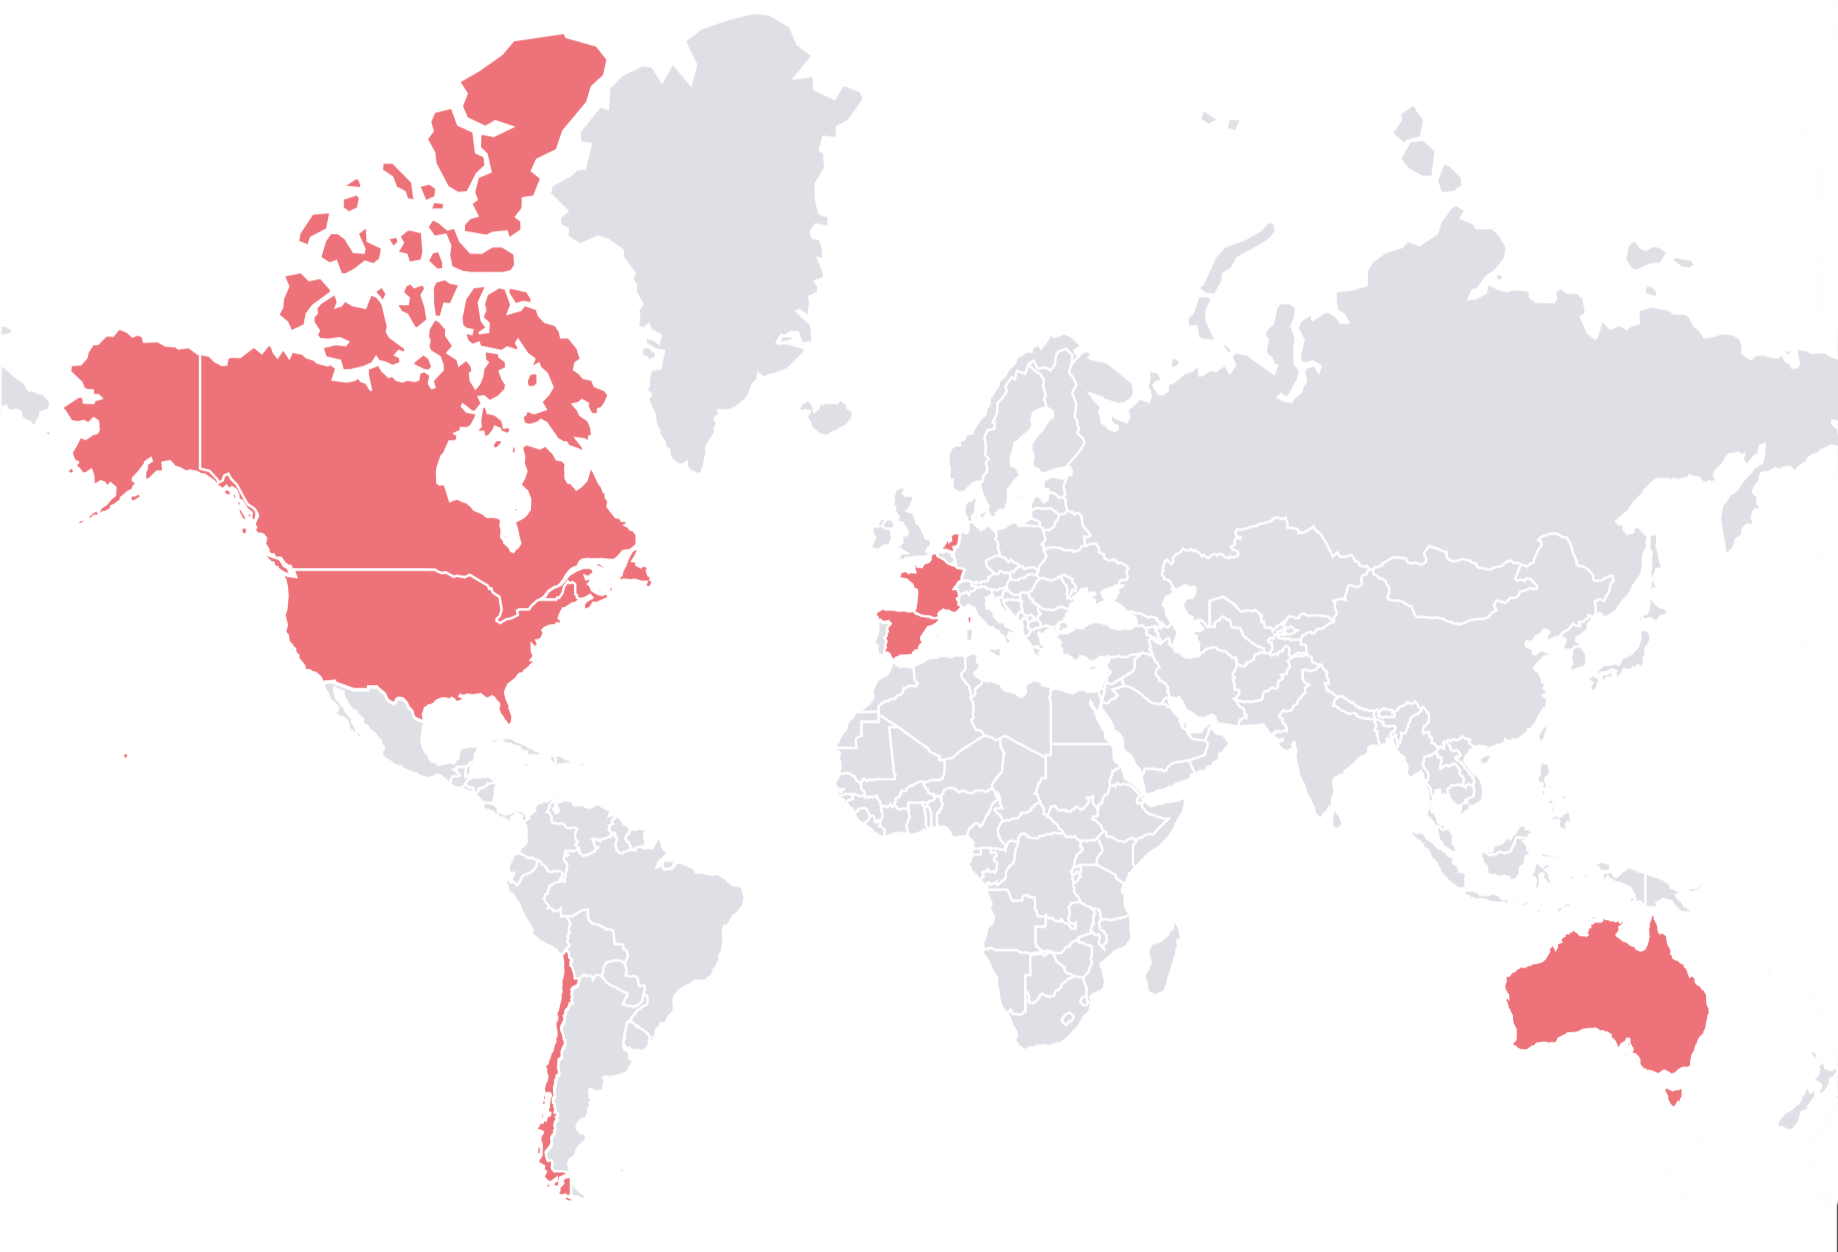 A world map highlighting the 7 countries the gallery represents artists from: Australia, Canada, Chile, France, Netherlands, Spain, and The United States